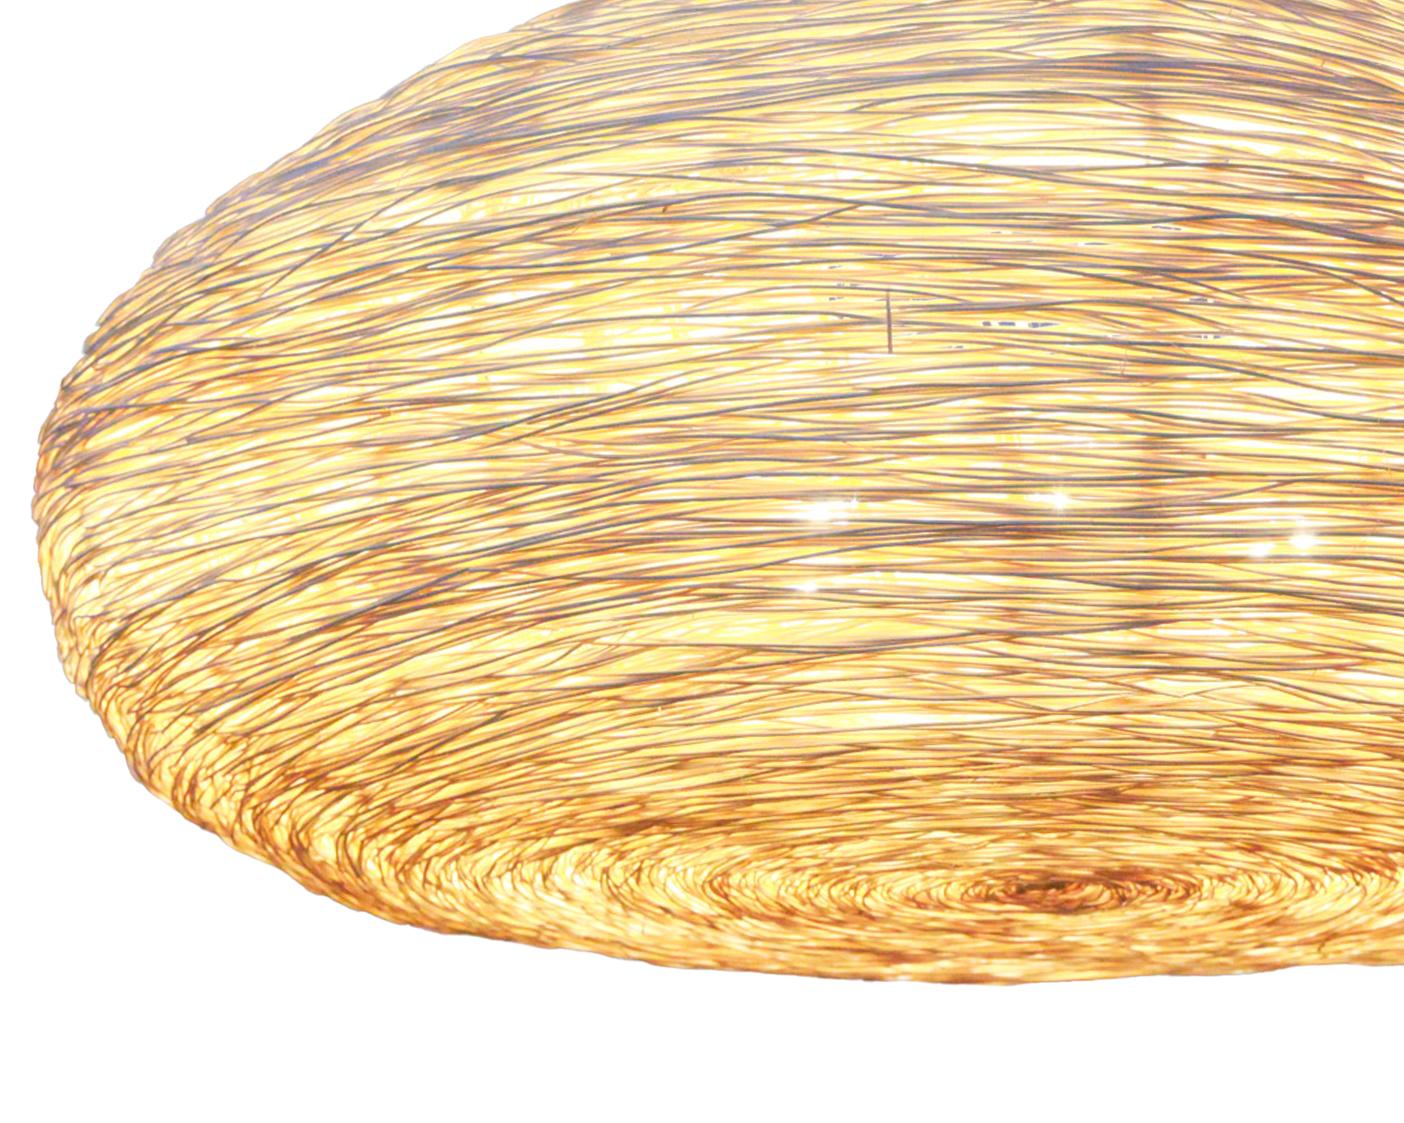 New World pendant light diffuser is a circular / ovaloid form, which is then clad with superfine extruded rattan, which when installed, generates a warm and generous light quality. Ango use our own unique technique of random hand weaving to create